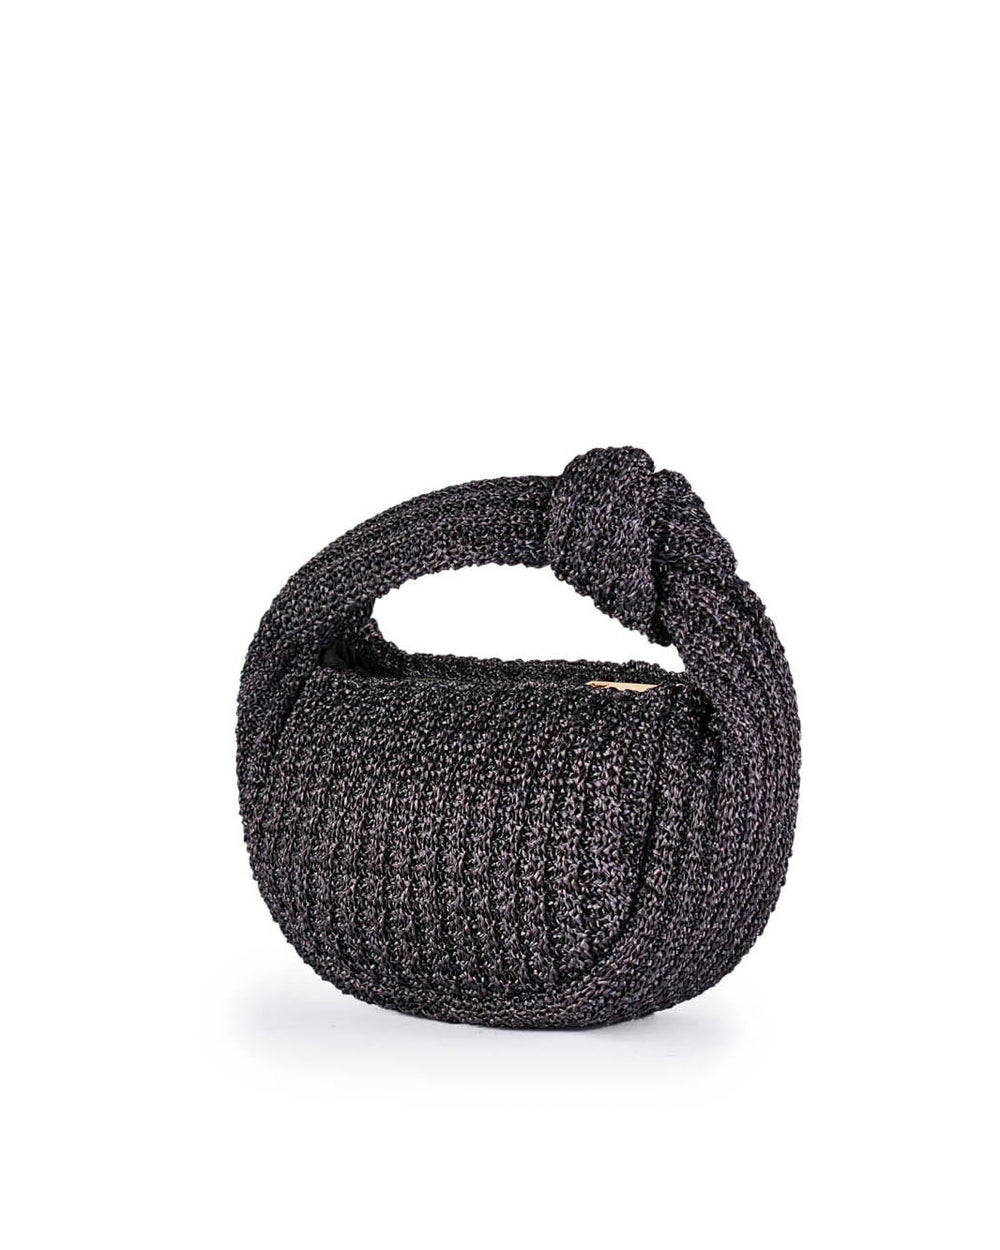 Black knitted handbag with a looped handle